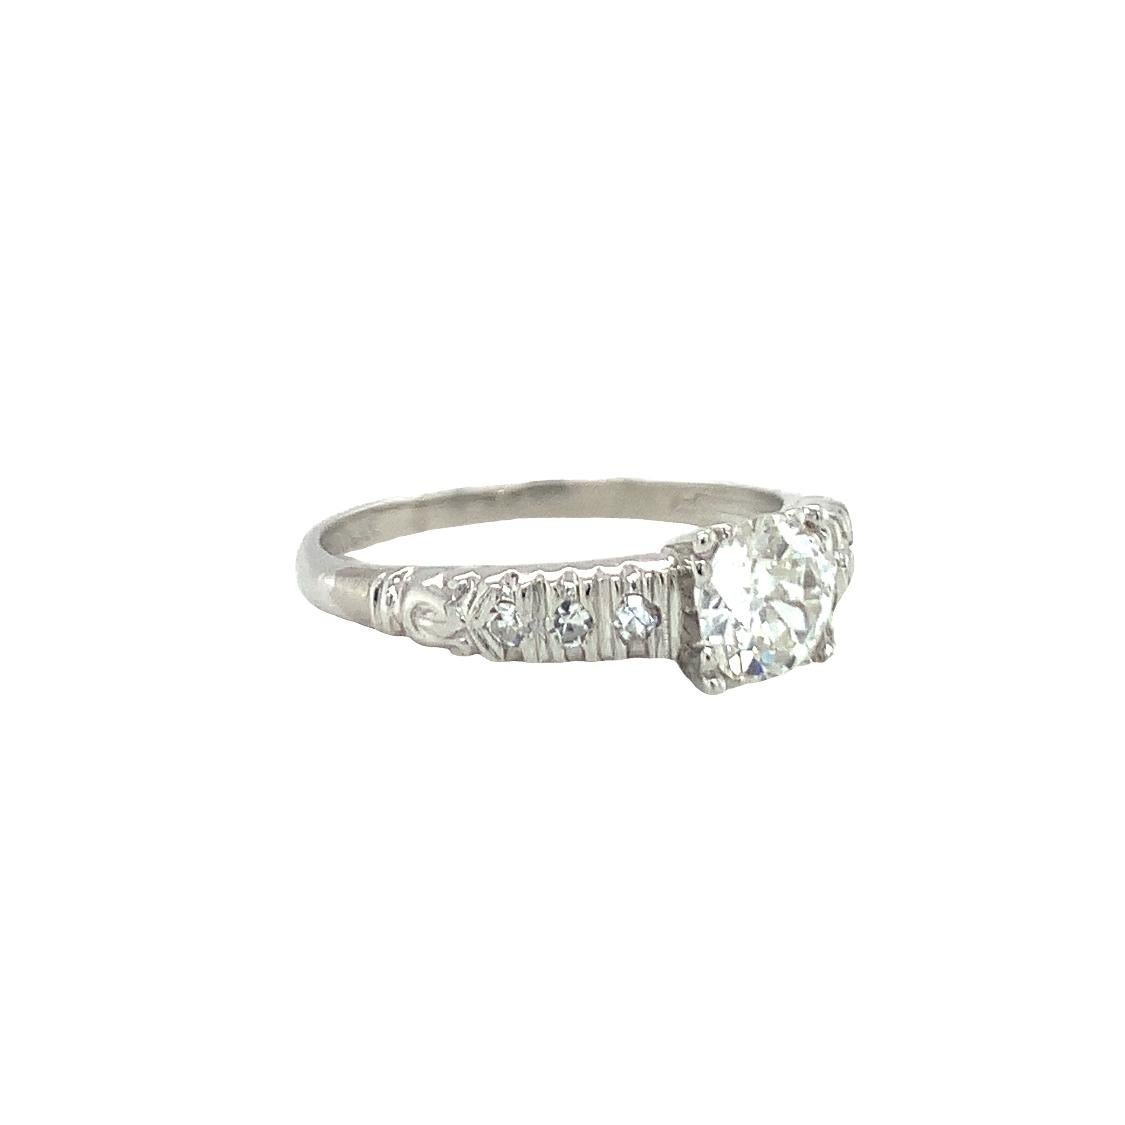 One Art Deco diamond solitaire platinum ring centering one prong set, old European cut diamond weighing 0.60 ct. with I-J color and VS-2 clarity. The center stone is set slightly perched up above while being flanked by six single round cut diamonds